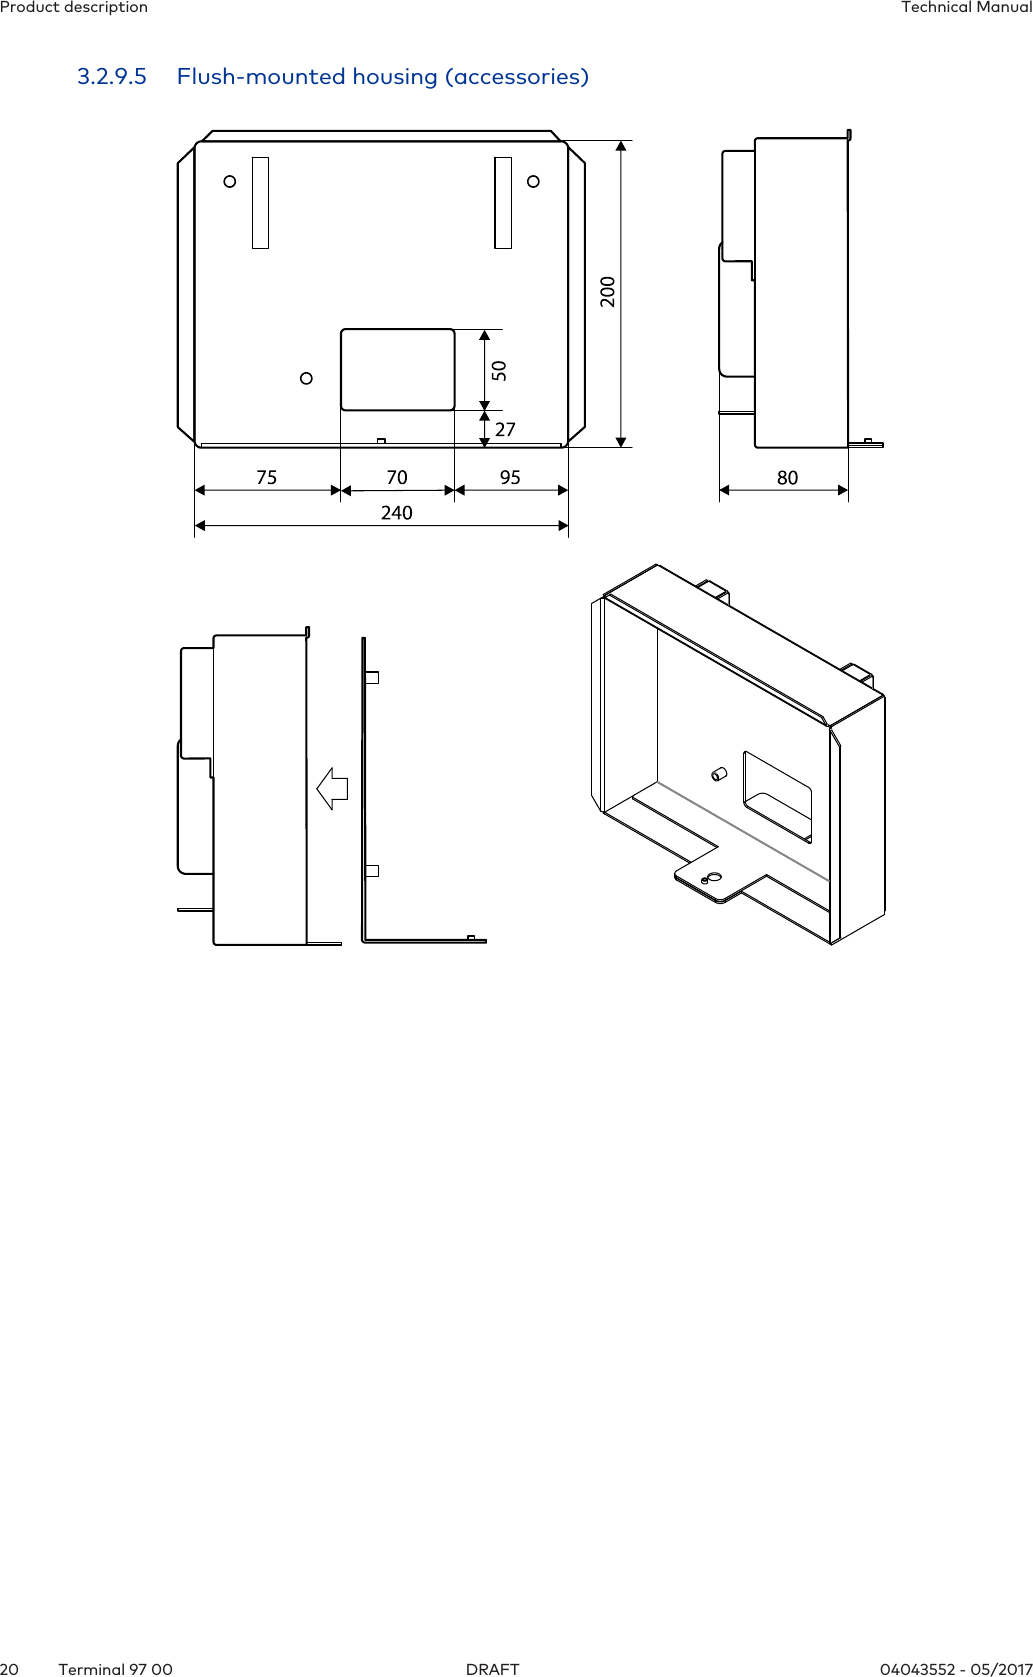 Product description Technical Manual20 04043552 - 05/2017Terminal 97 00 DRAFT3.2.9.5 Flush-mounted housing (accessories)